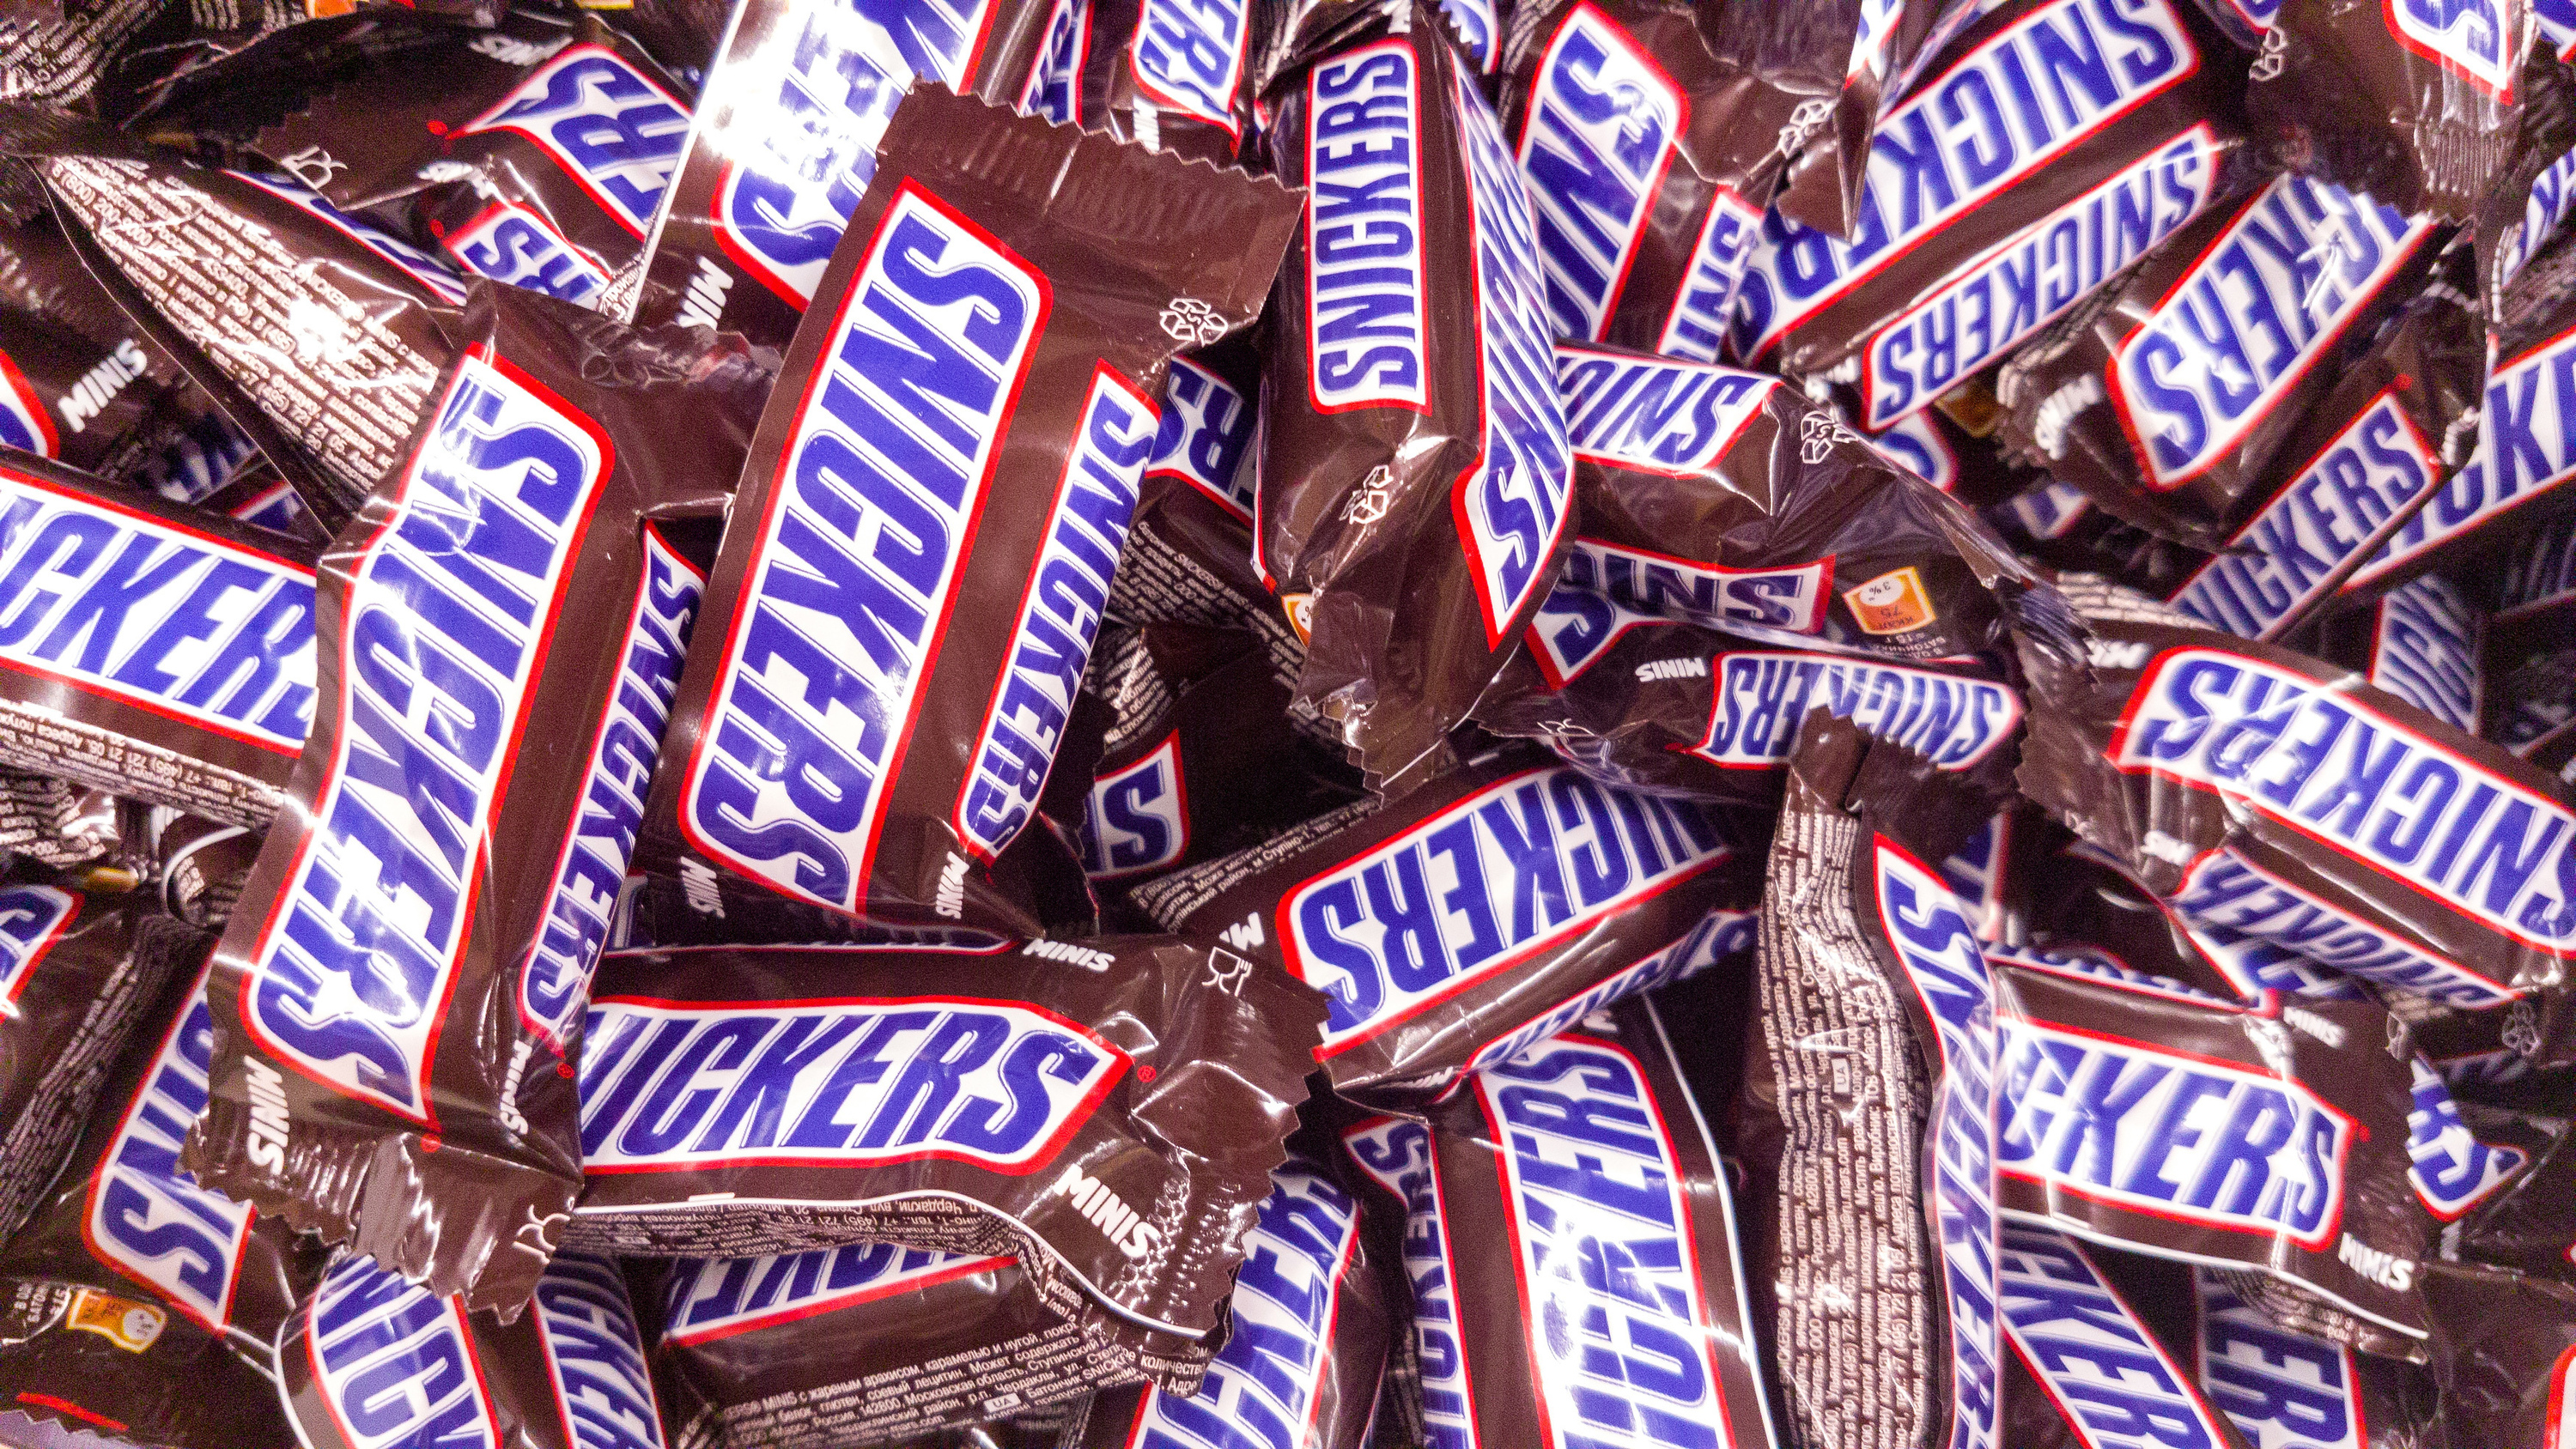 Snickers - Fun Size - Economy Candy